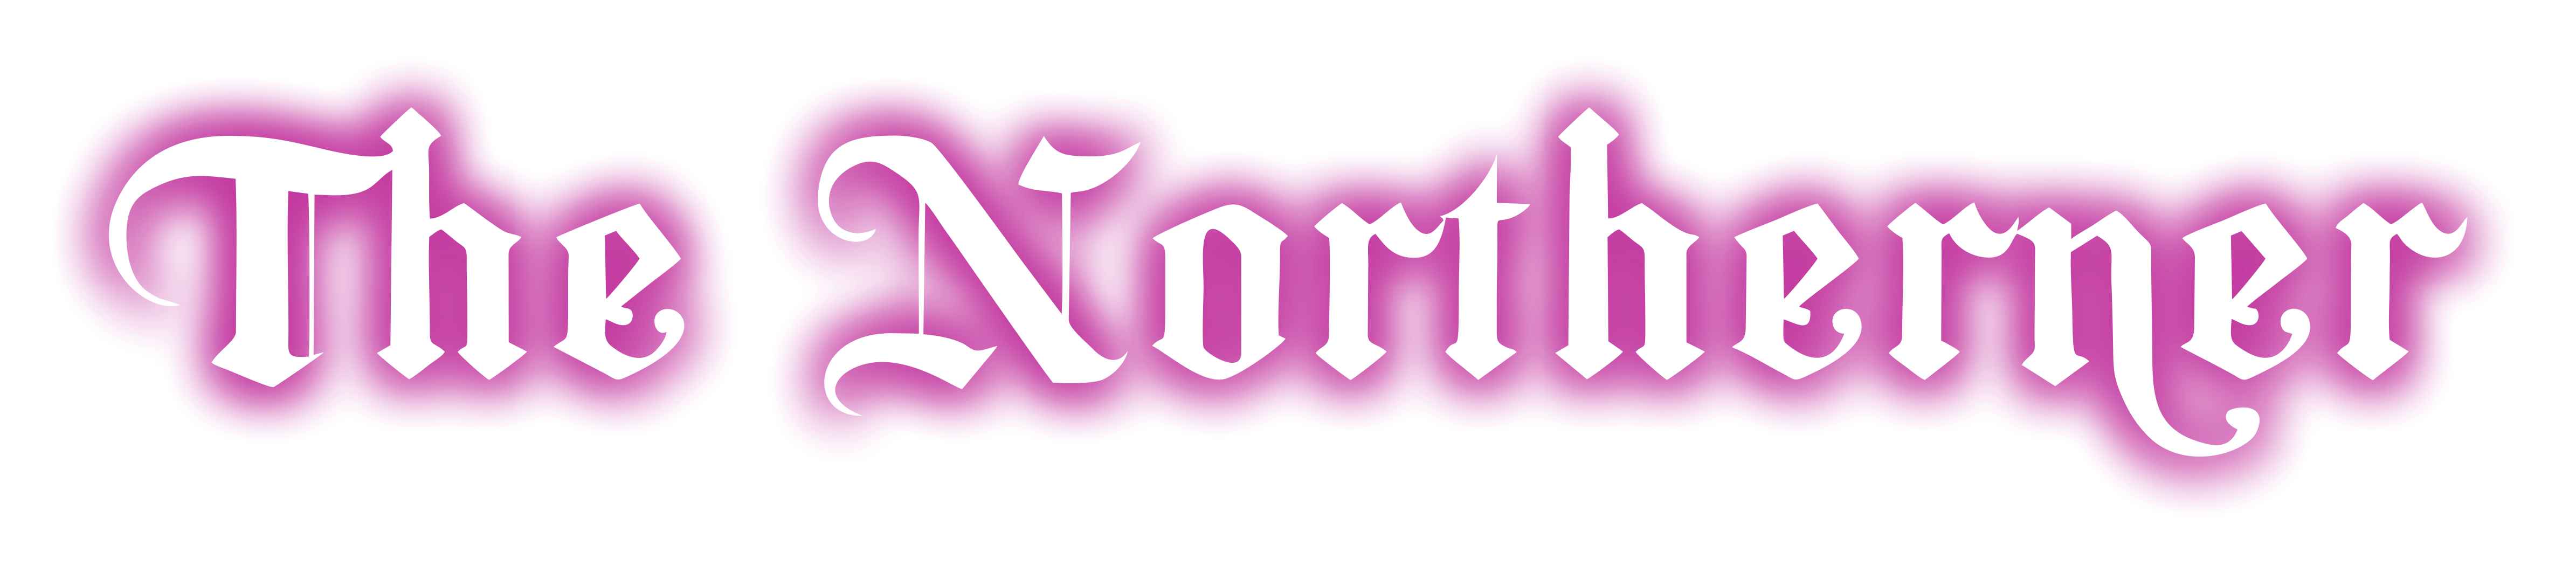 North Central University’s Official News Organization, The Northerner, is Accepting New Staff Members.